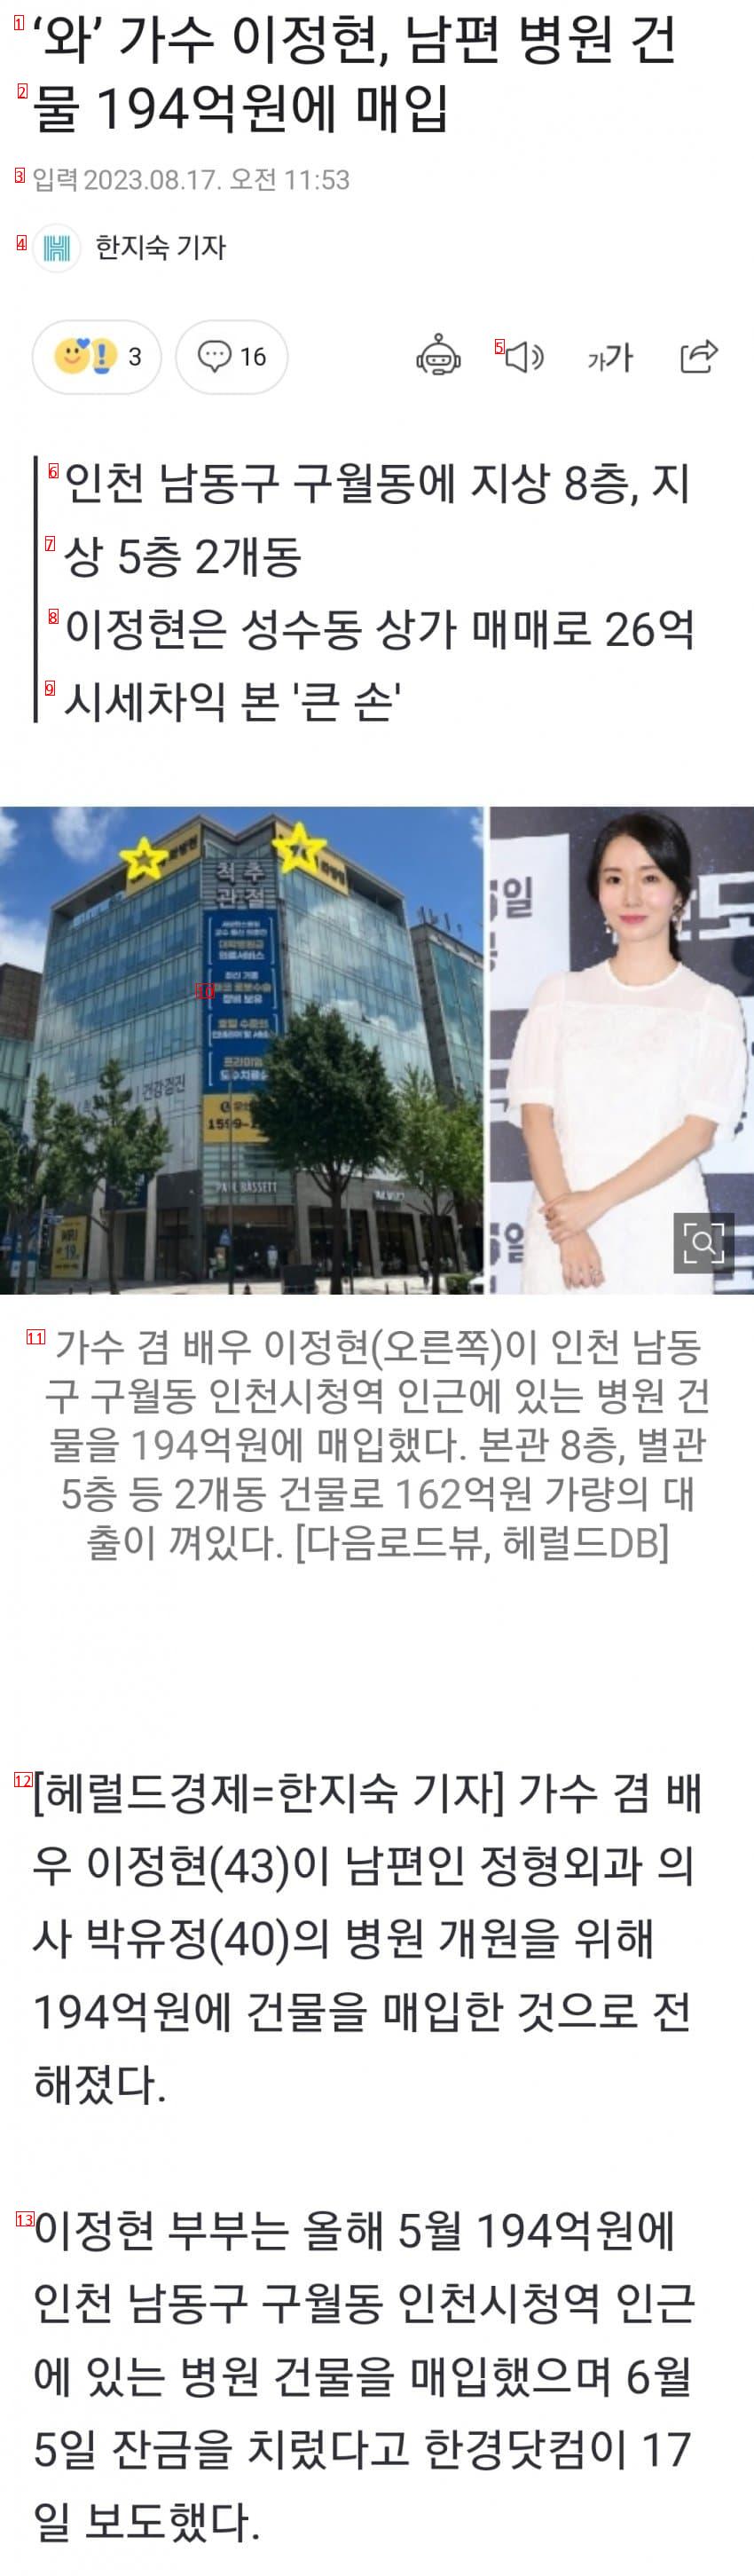 A building purchased by singer Lee Jung-hyun